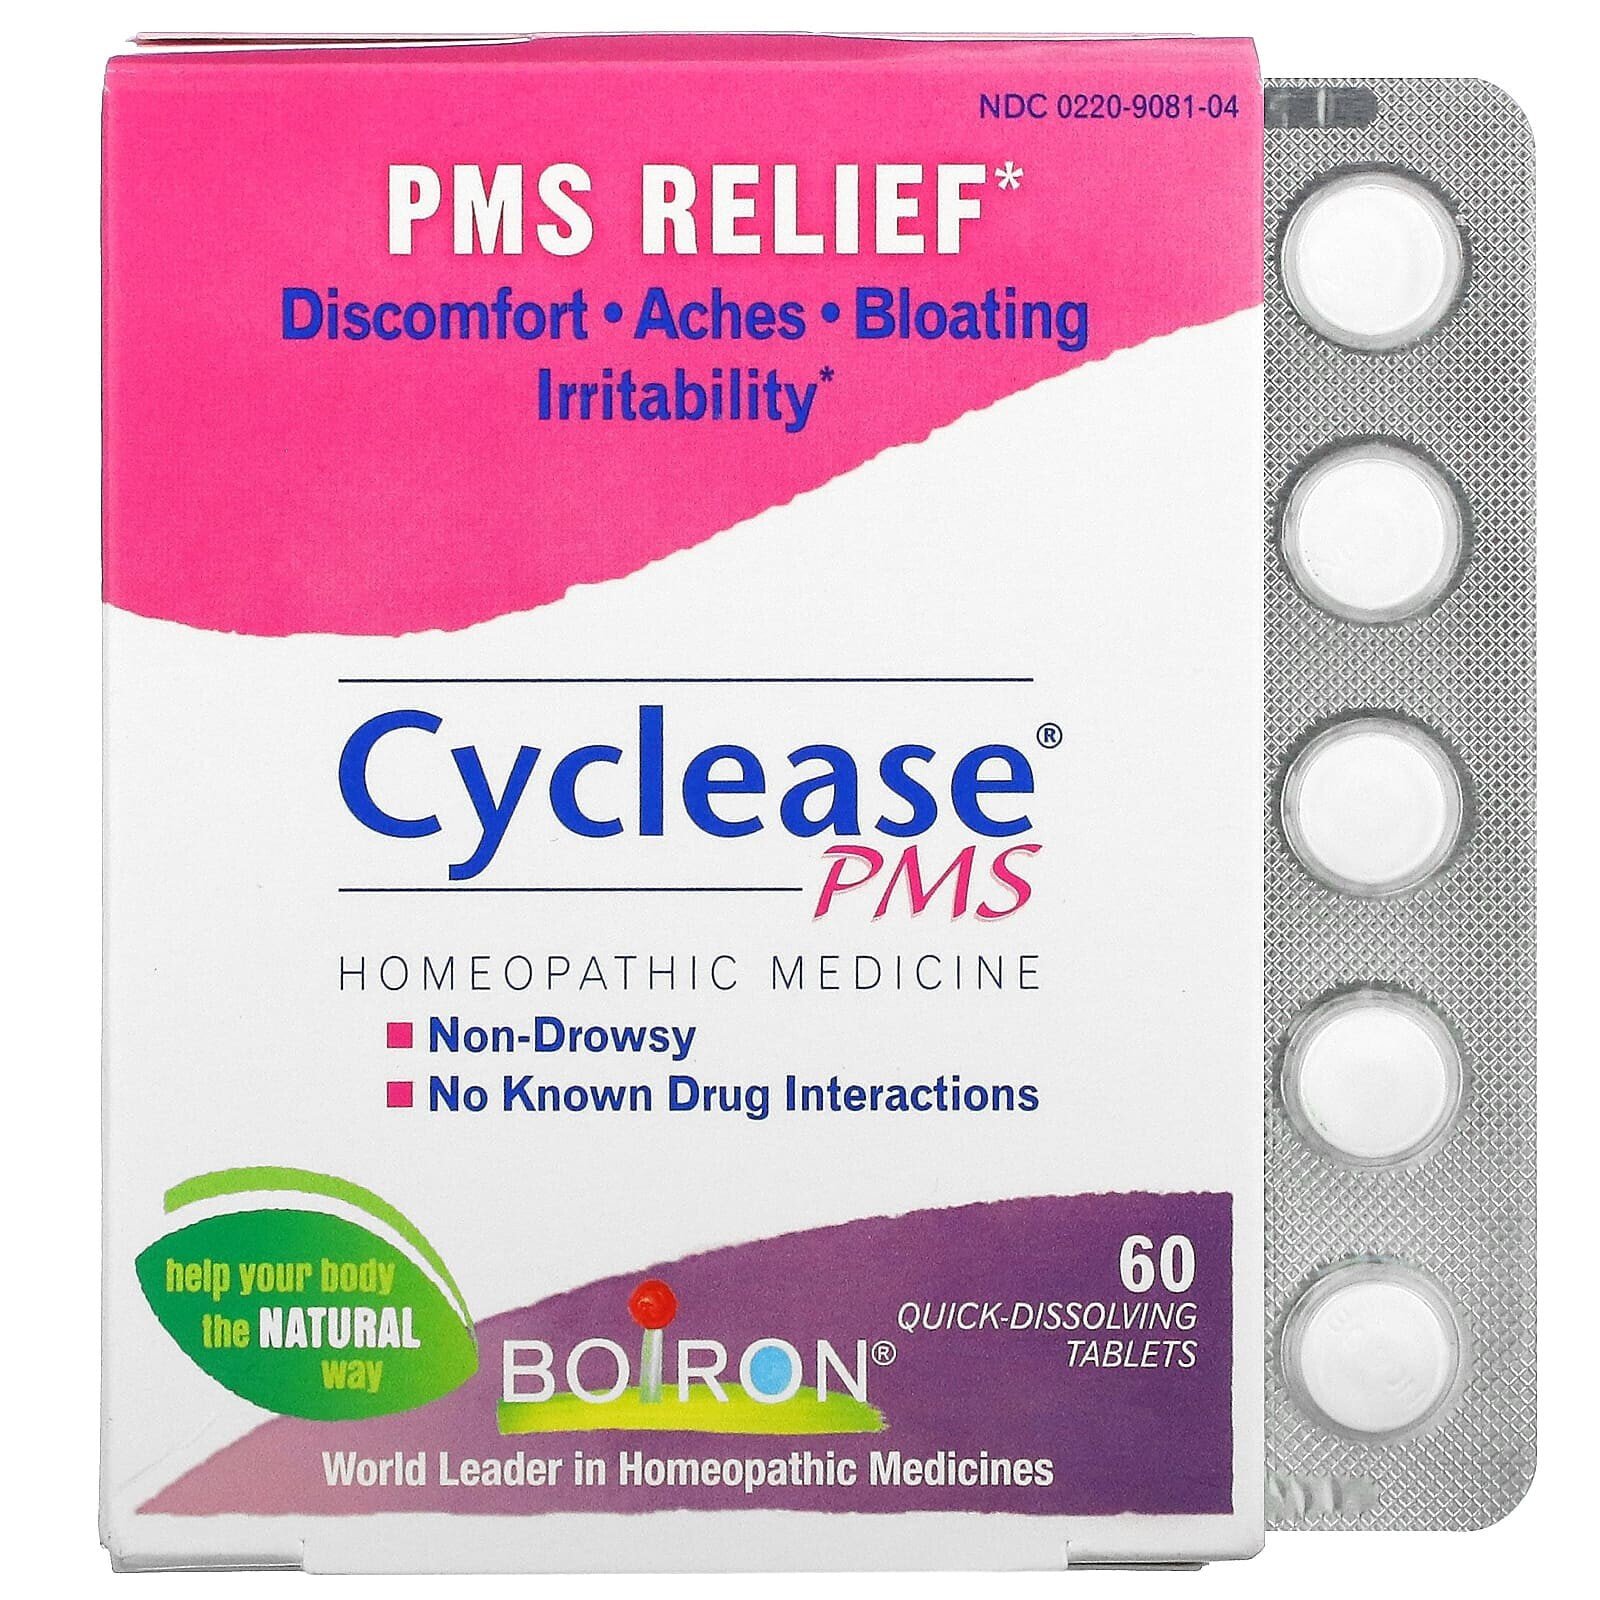 Cyclease PMS, Unflavored, 60 Meltaway Tablets